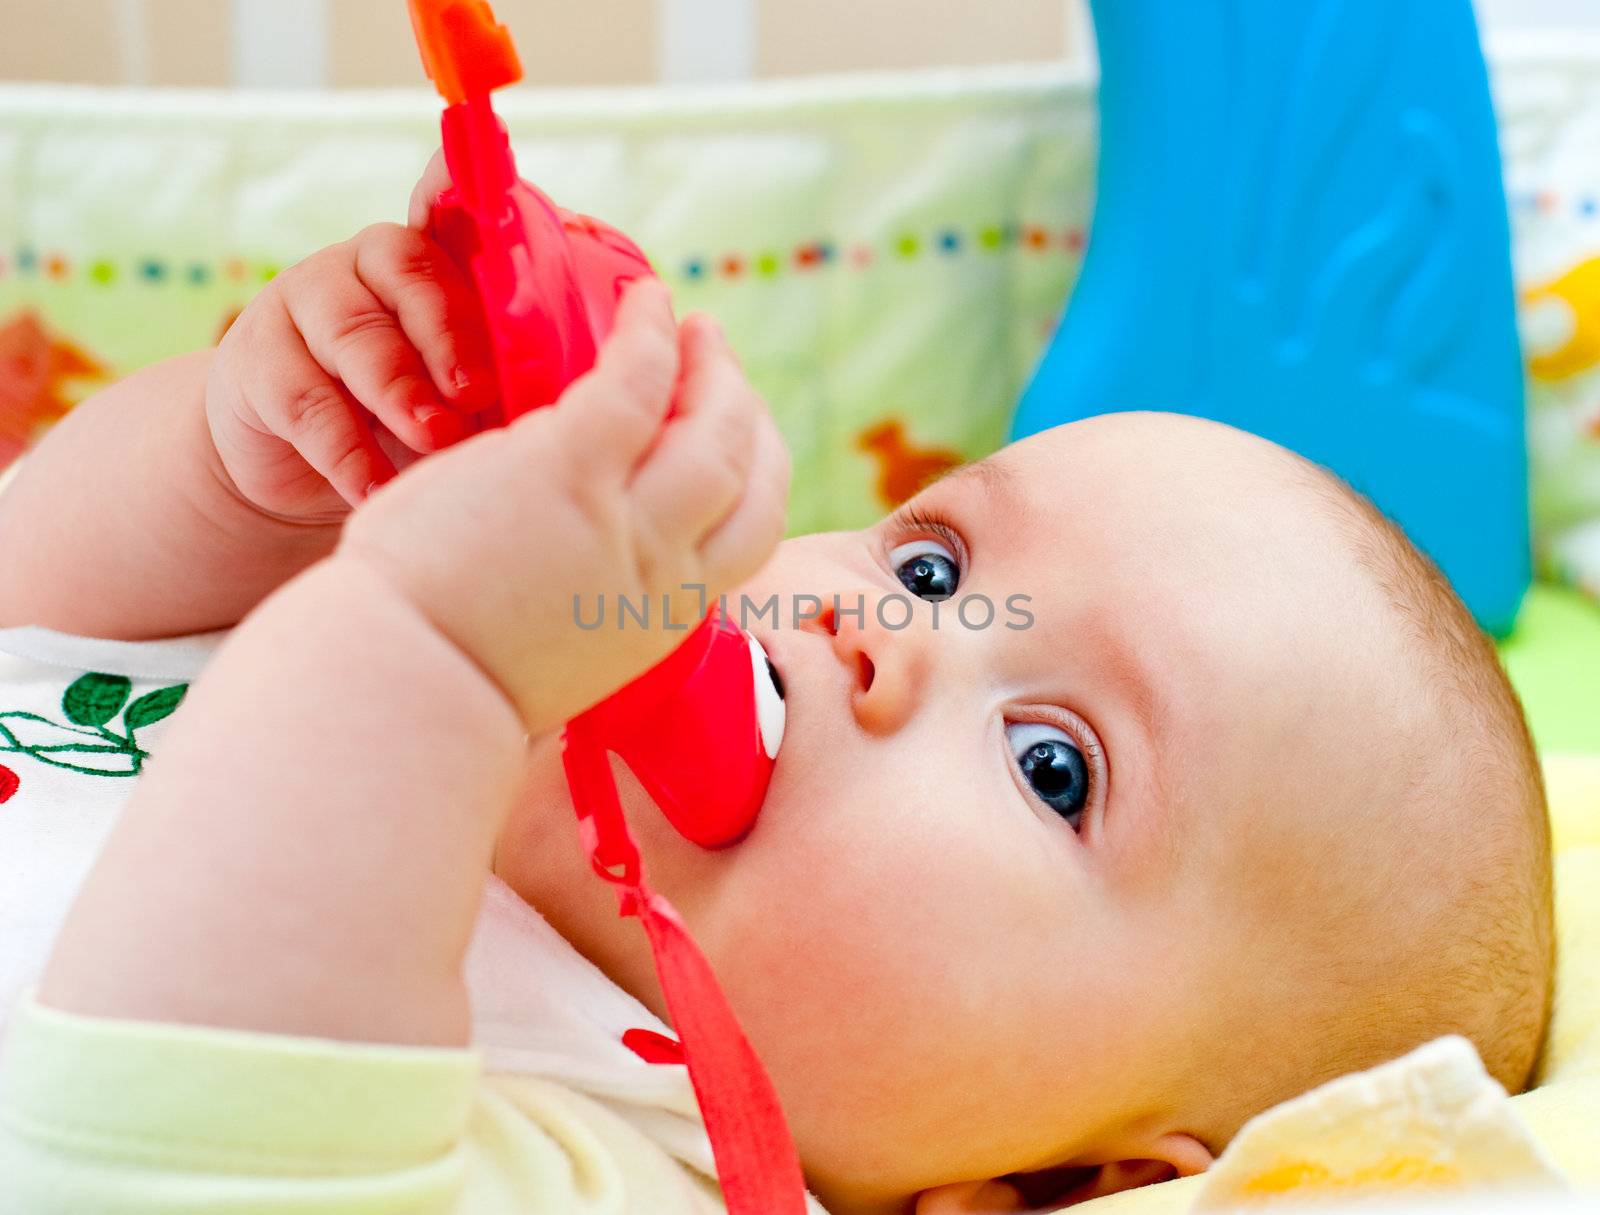 Infant with teething toy by naumoid